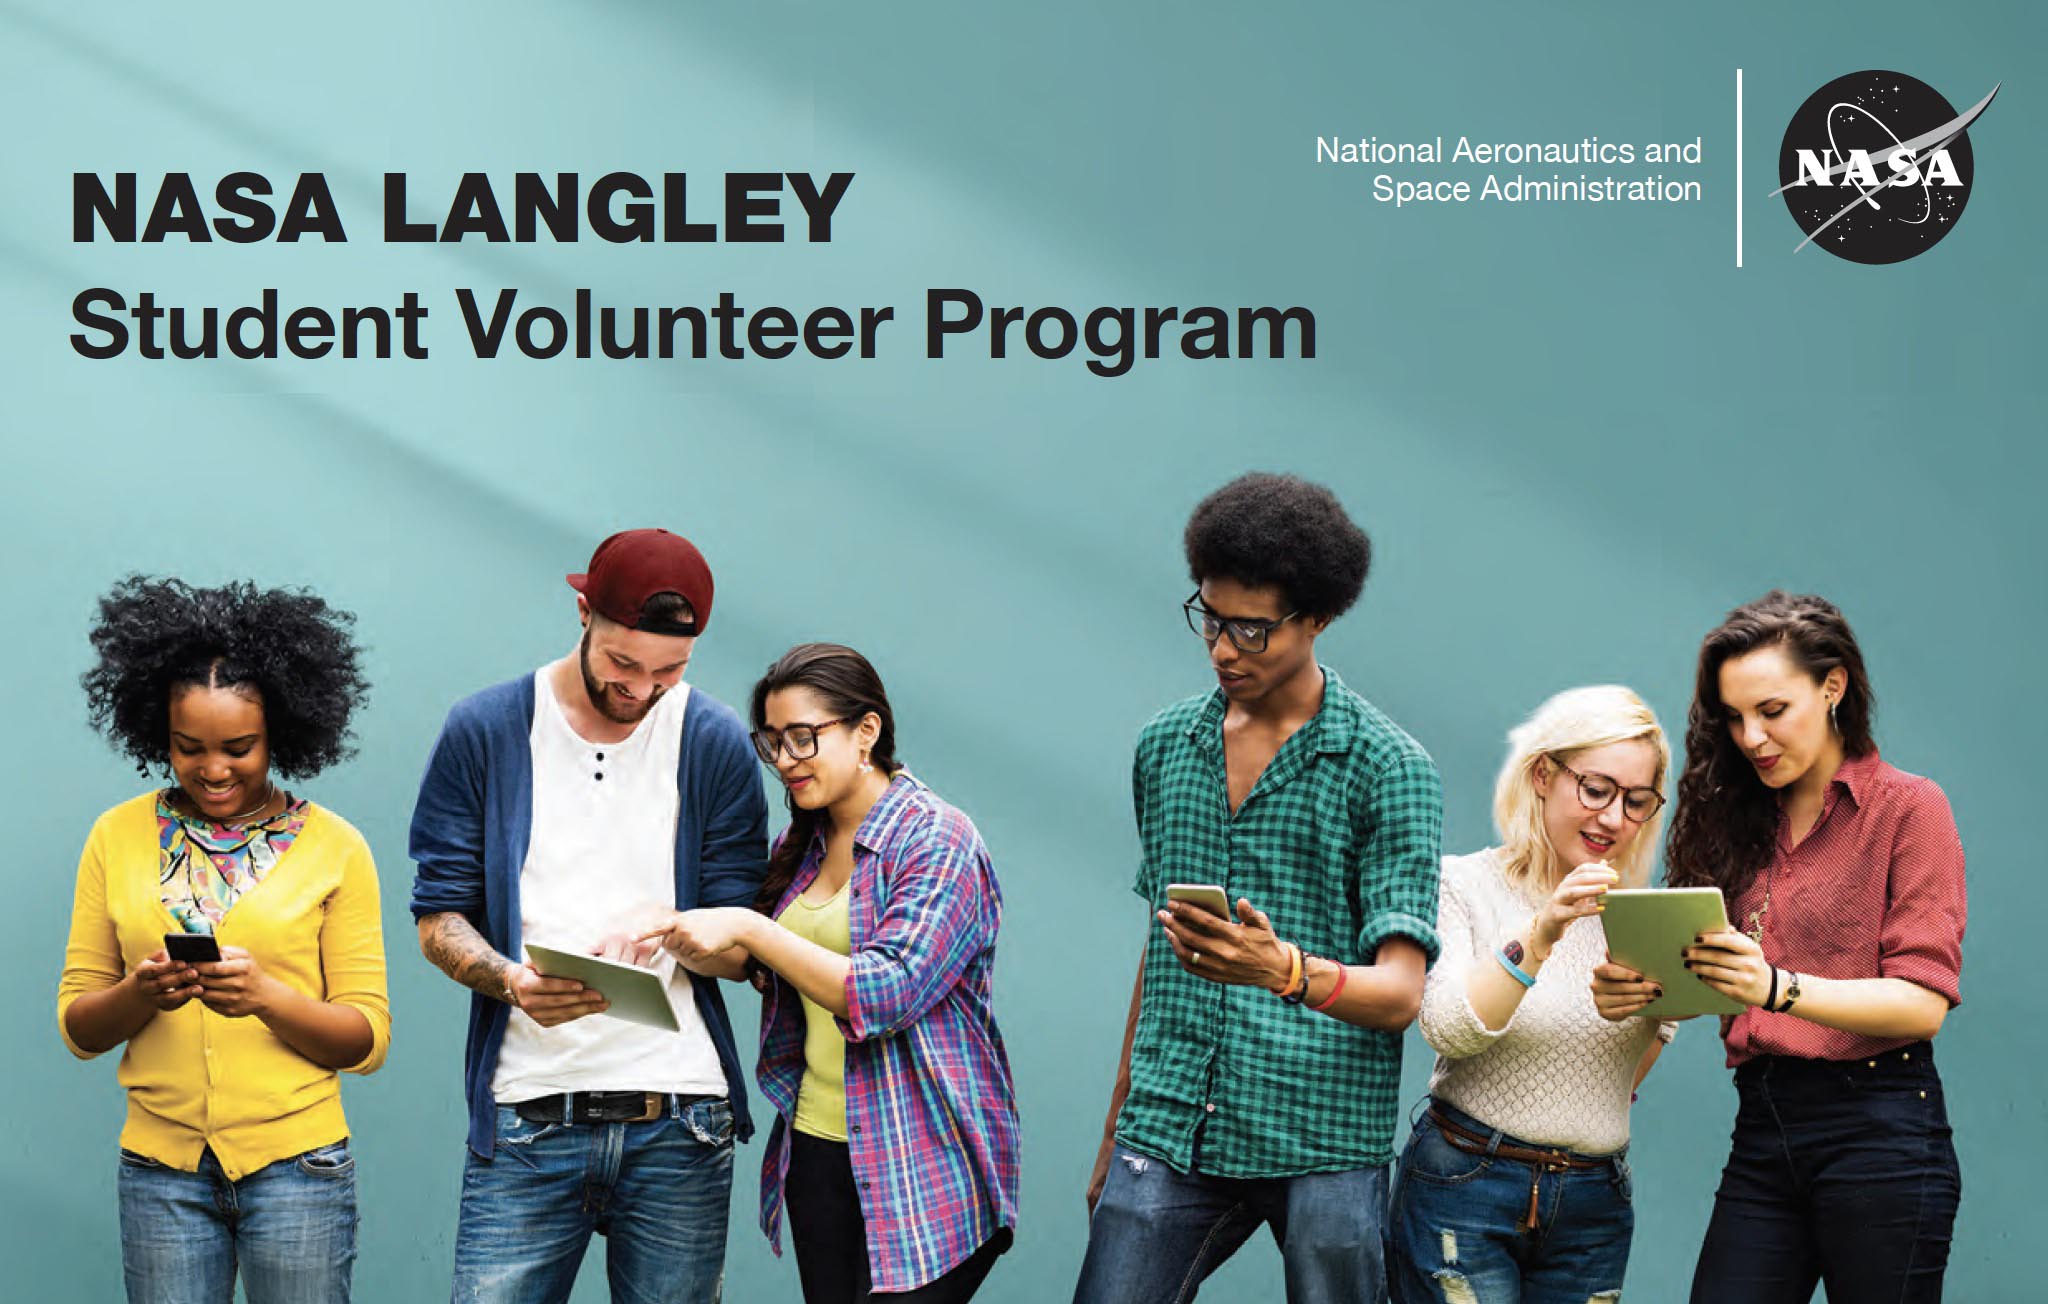 This is a flyer graphic for the Langley Student Volunteer Program. There are 6 students wearing casual clothes standing in a row. They are holding in their hands tablets and smartphones. The background of the graphic is a teal gradient.